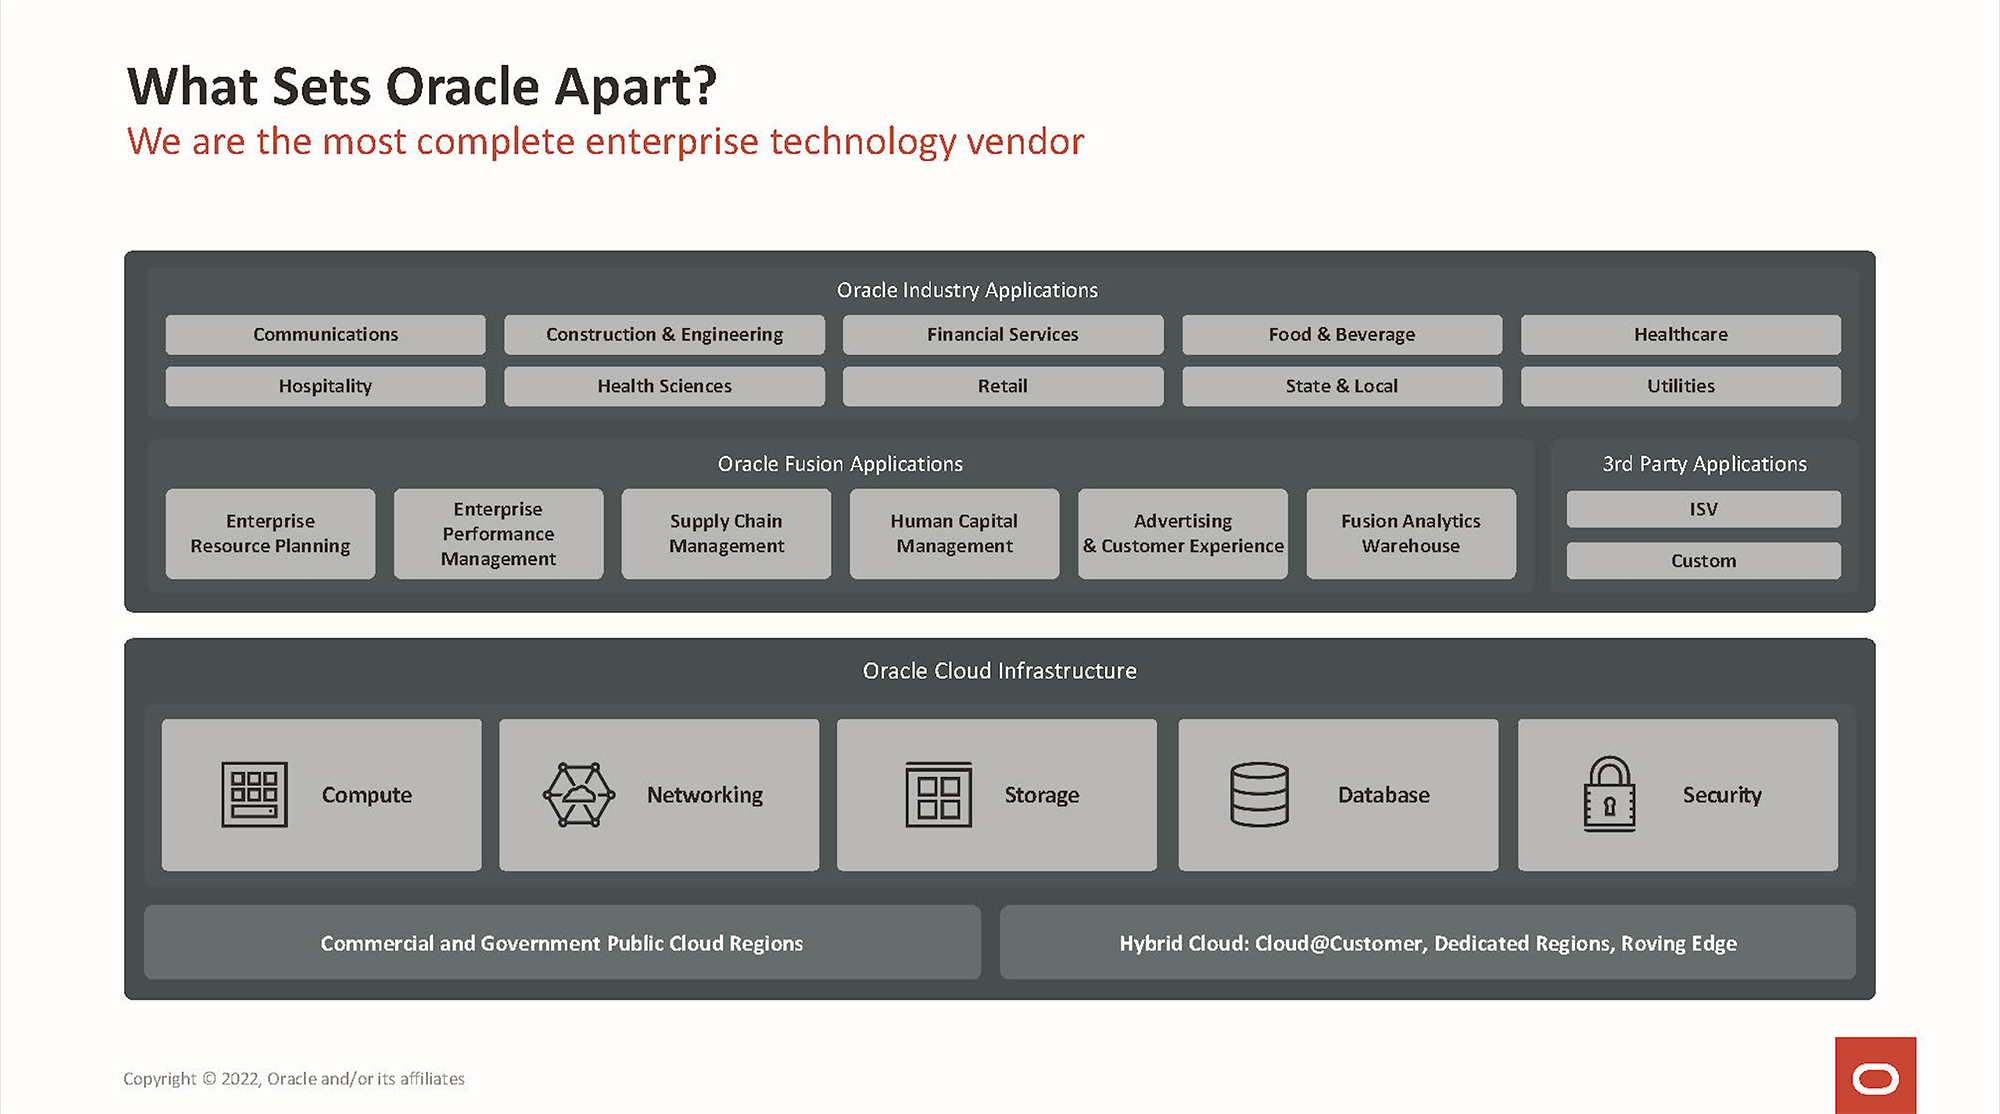 Oracle marketecture diagram